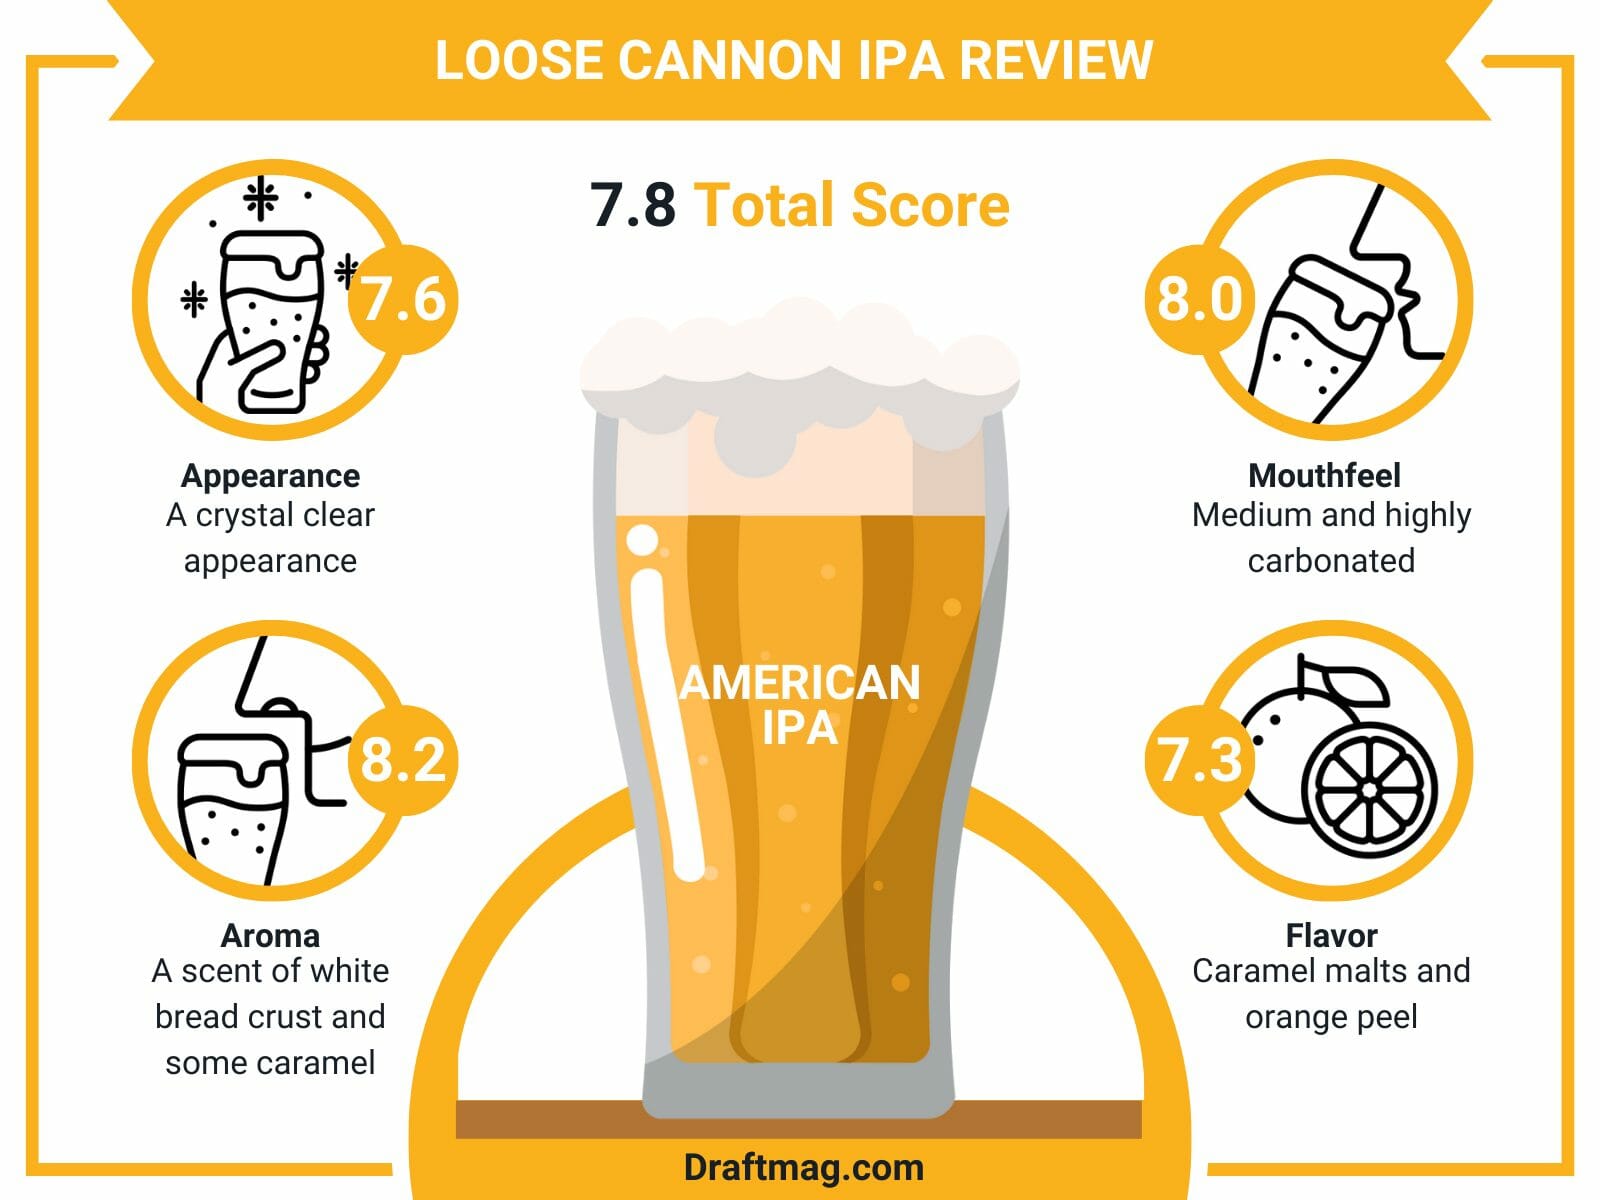 Loose cannon ipa review infographic